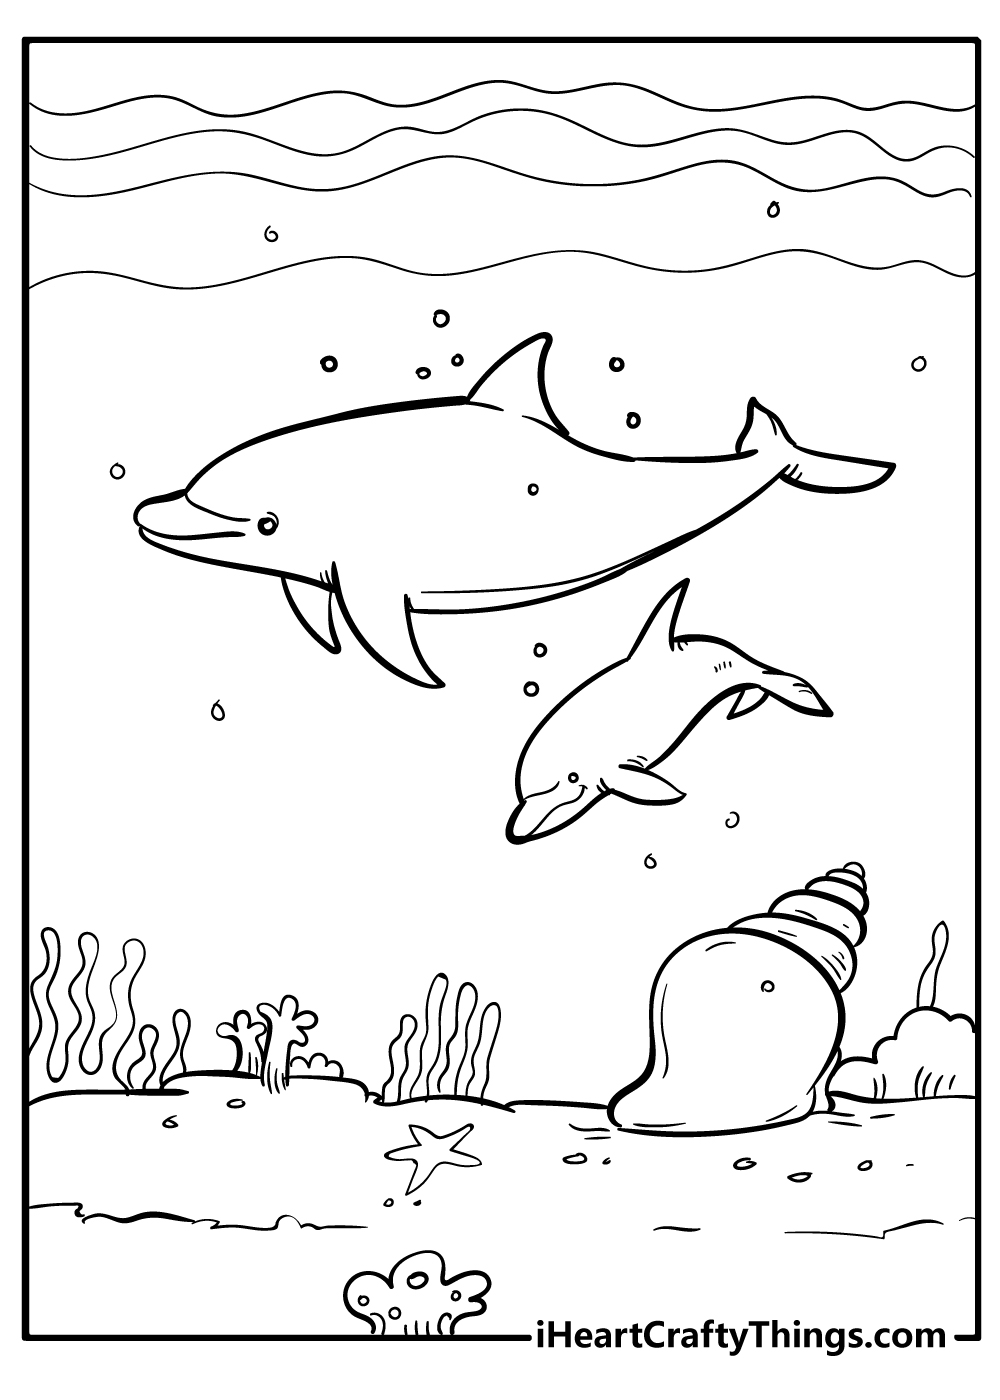 Dolphin family Coloring Pages free download for kids